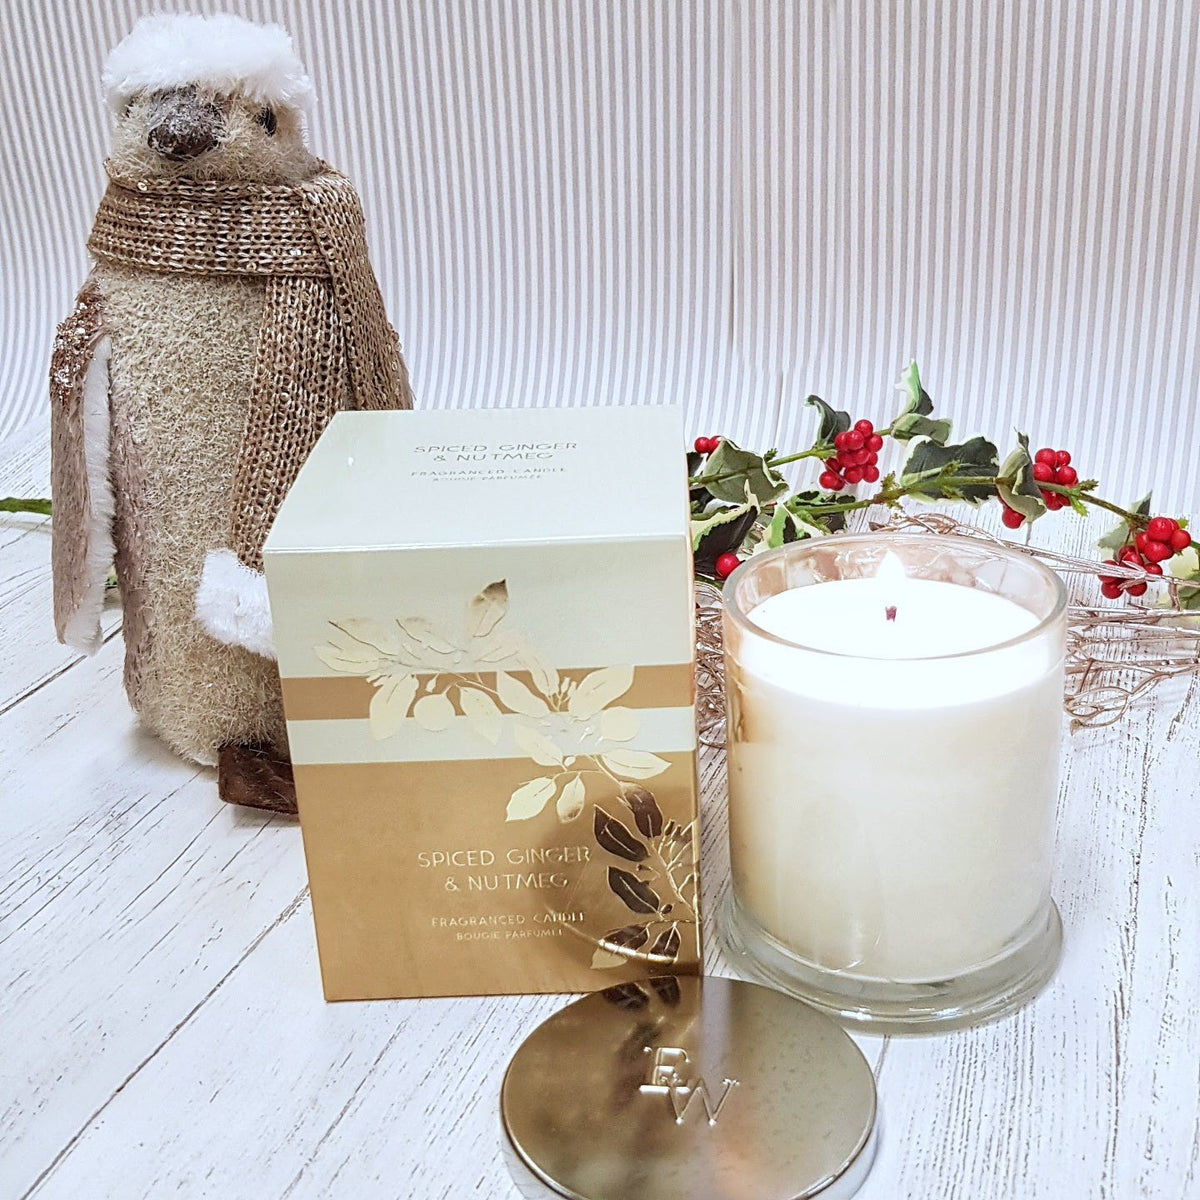 Spiced Ginger & Nutmeg Scented Candle close up with Penguin ornament